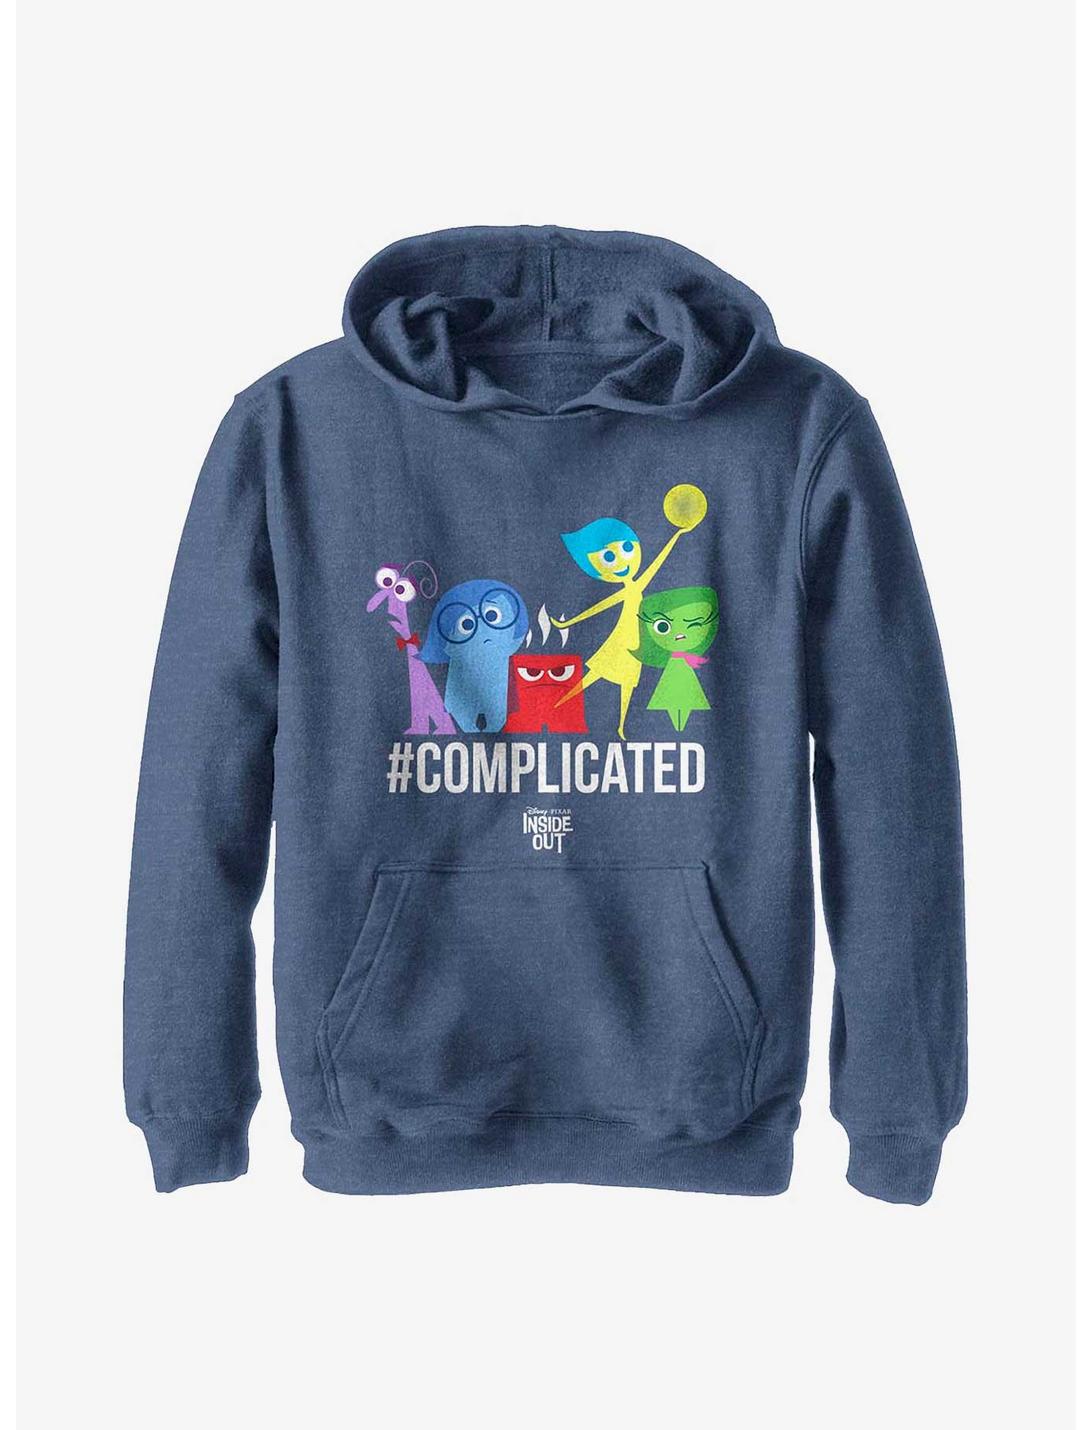 Disney Pixar Inside Out Complicated Youth Hoodie, NAVY HTR, hi-res